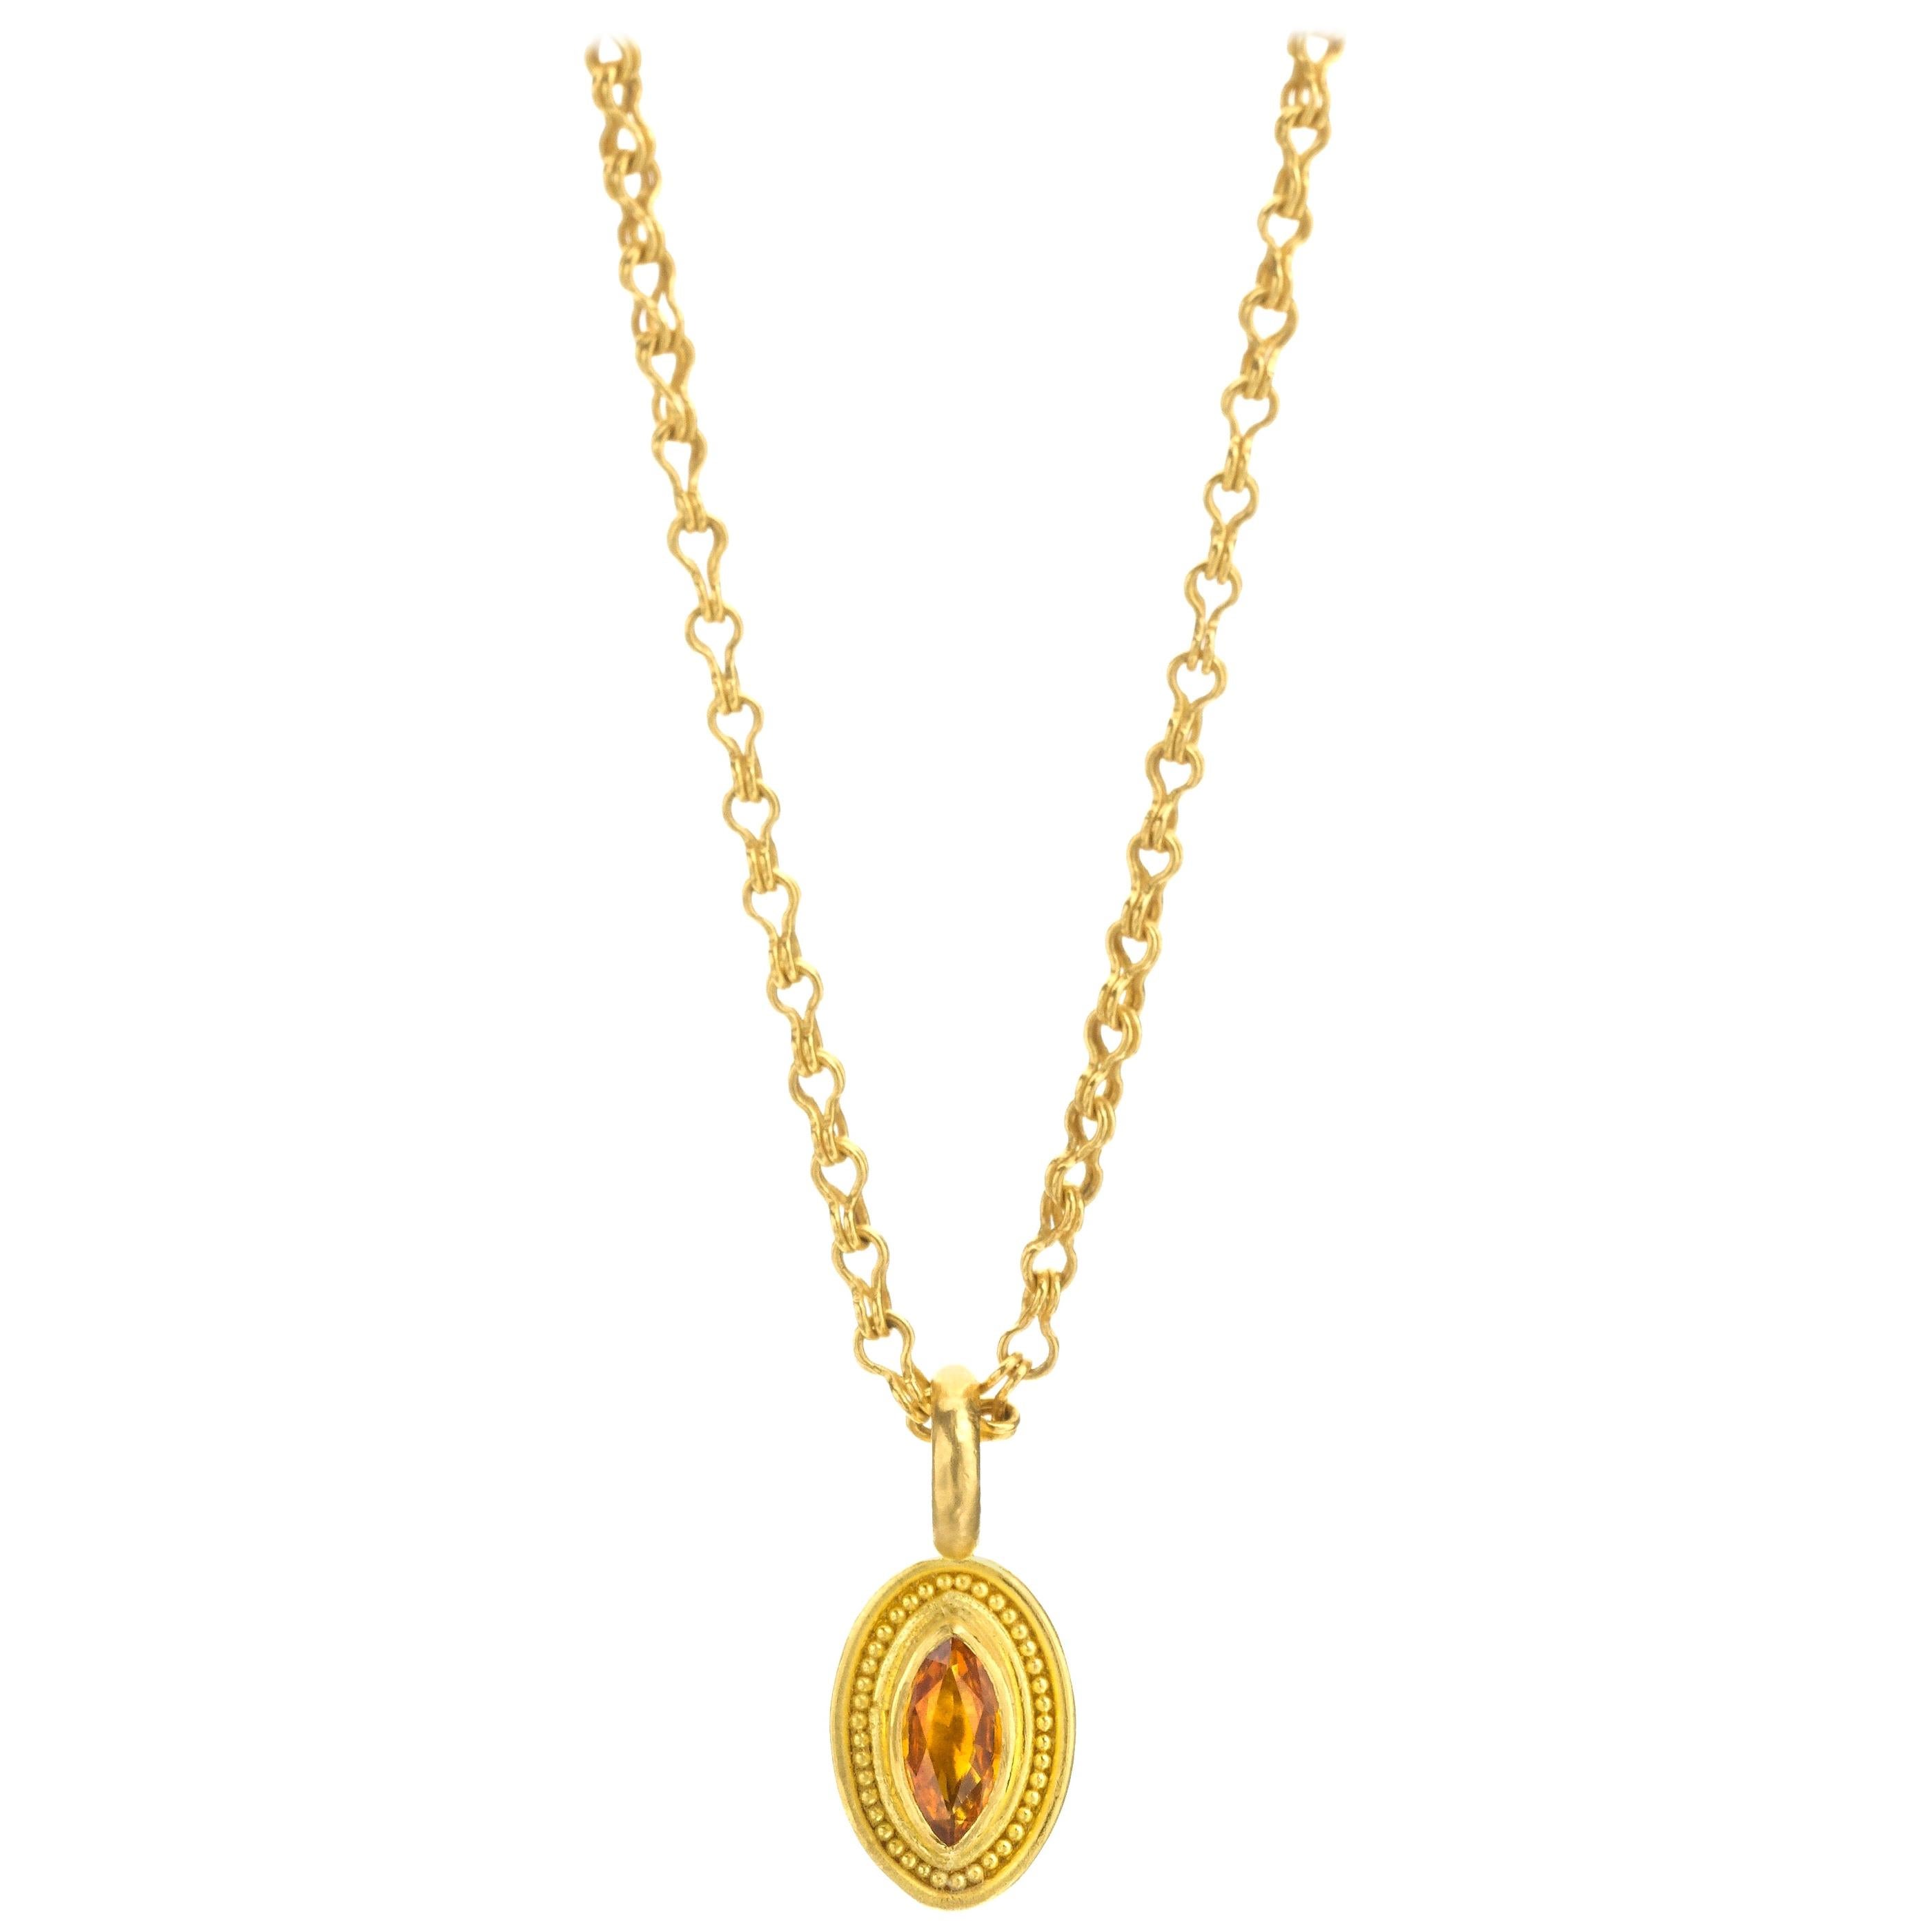 Vibrant marquise cut golden-yellow sapphire pendant/ charm. Set in 22 karat gold with delicate granulation. Pendant is on a mini sailor's knot chain in 22 karat gold (sold separately see storefront). Entirely made by hand in New York City. 

